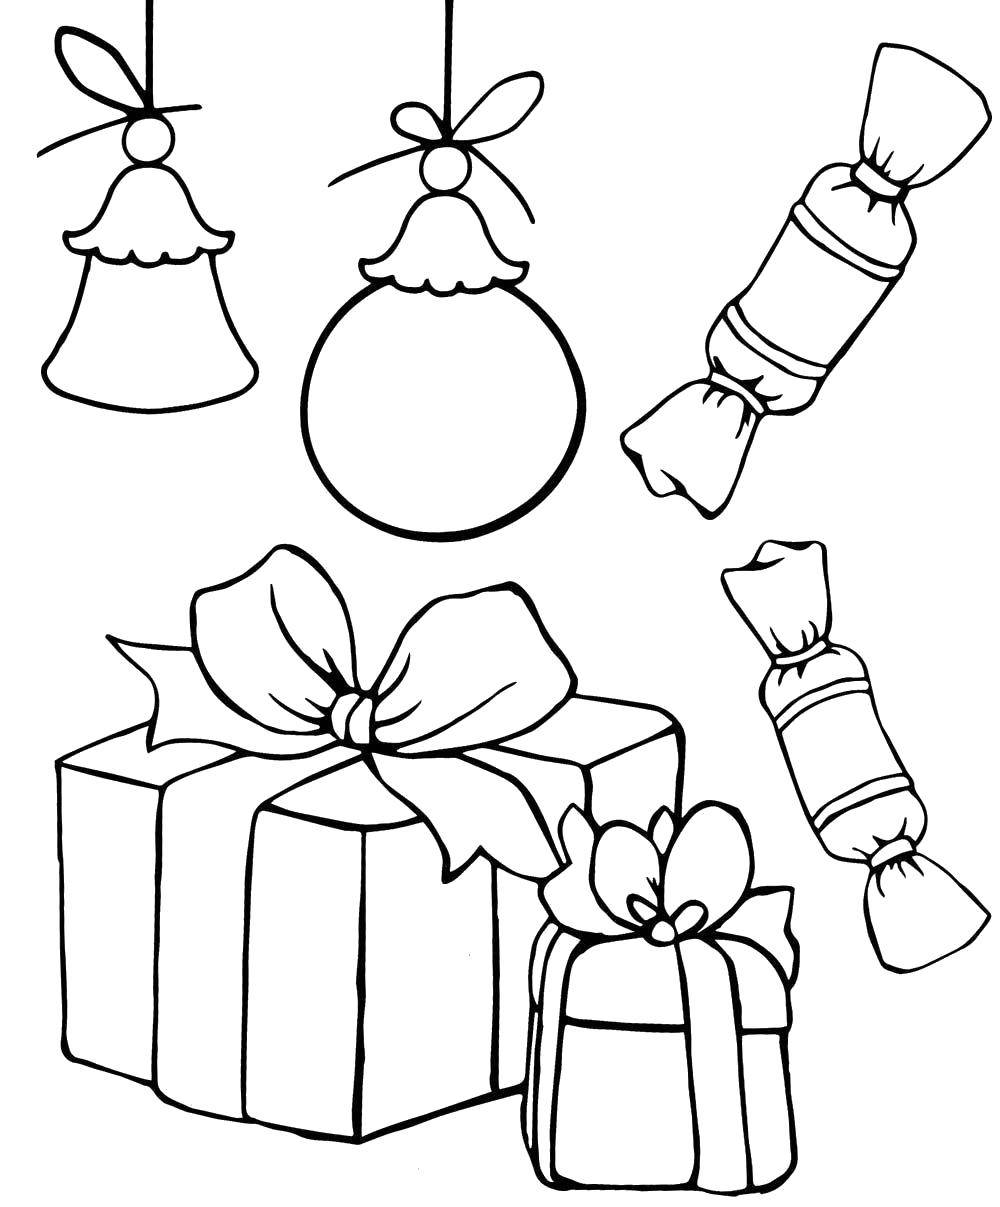 Coloring Christmas gifts. Category gifts. Tags:  Gifts, holiday.